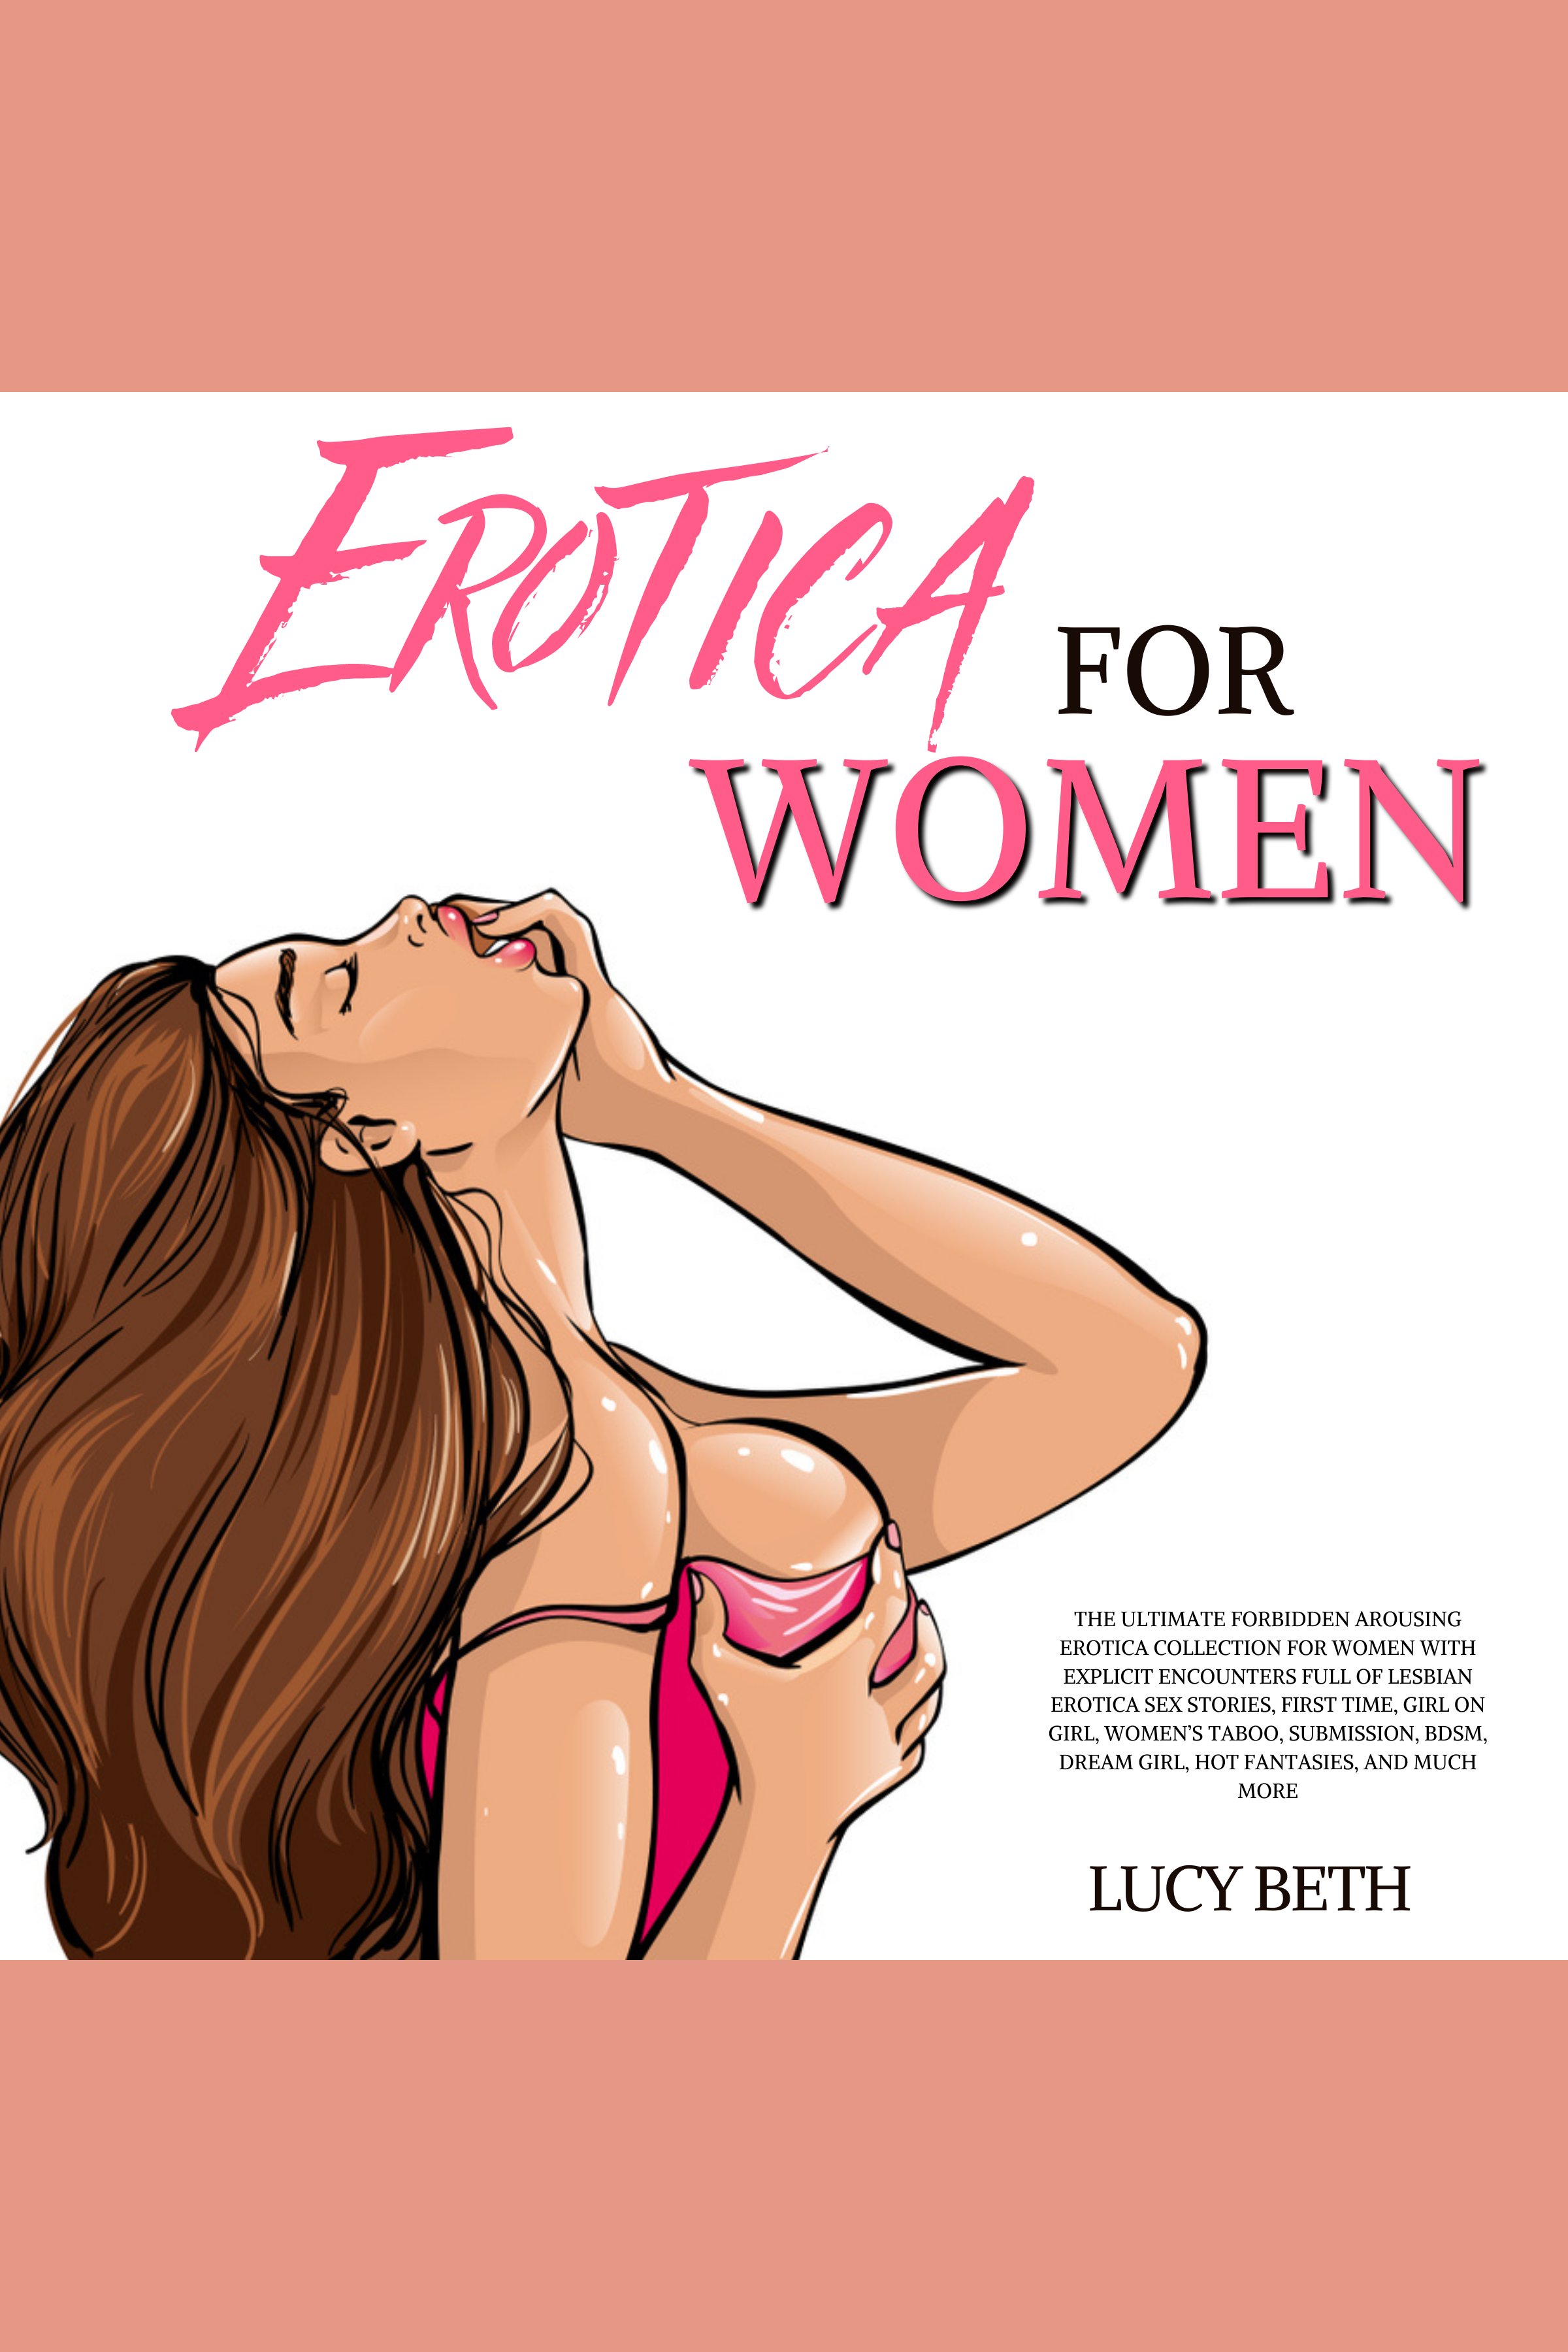 Erotica for Women by Lucy Beth pic